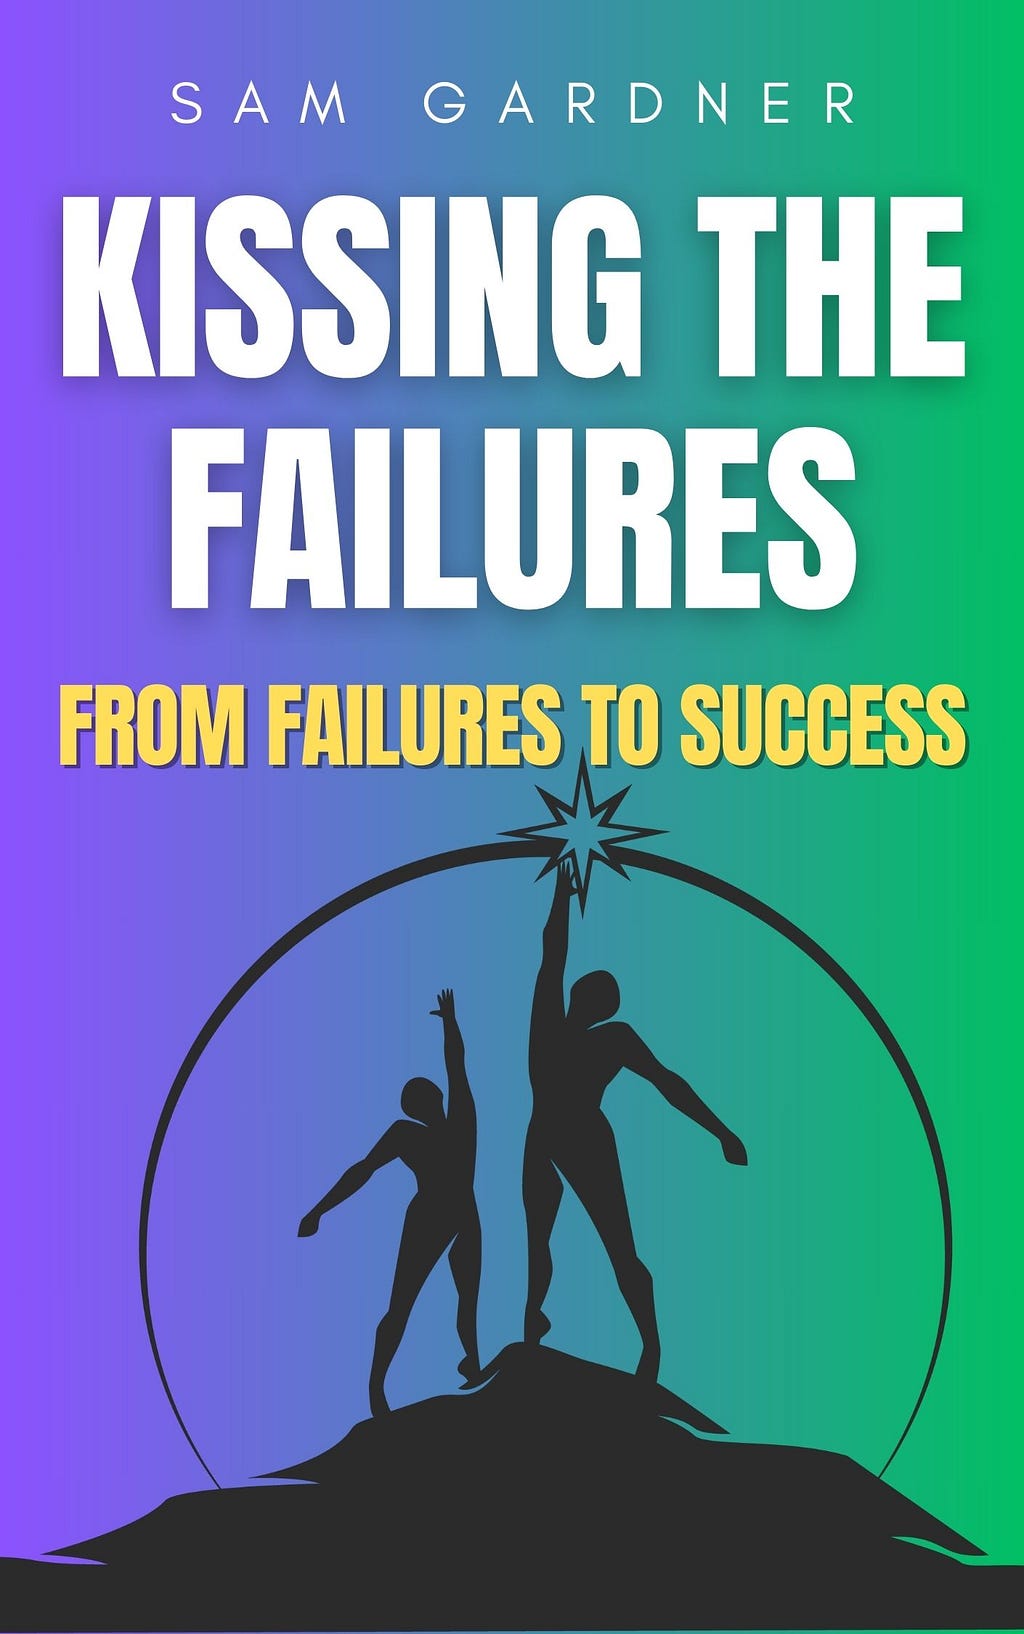 KISSING THE FAILURES: FROM FAILURES TO SUCCESS (Sam Gardner)